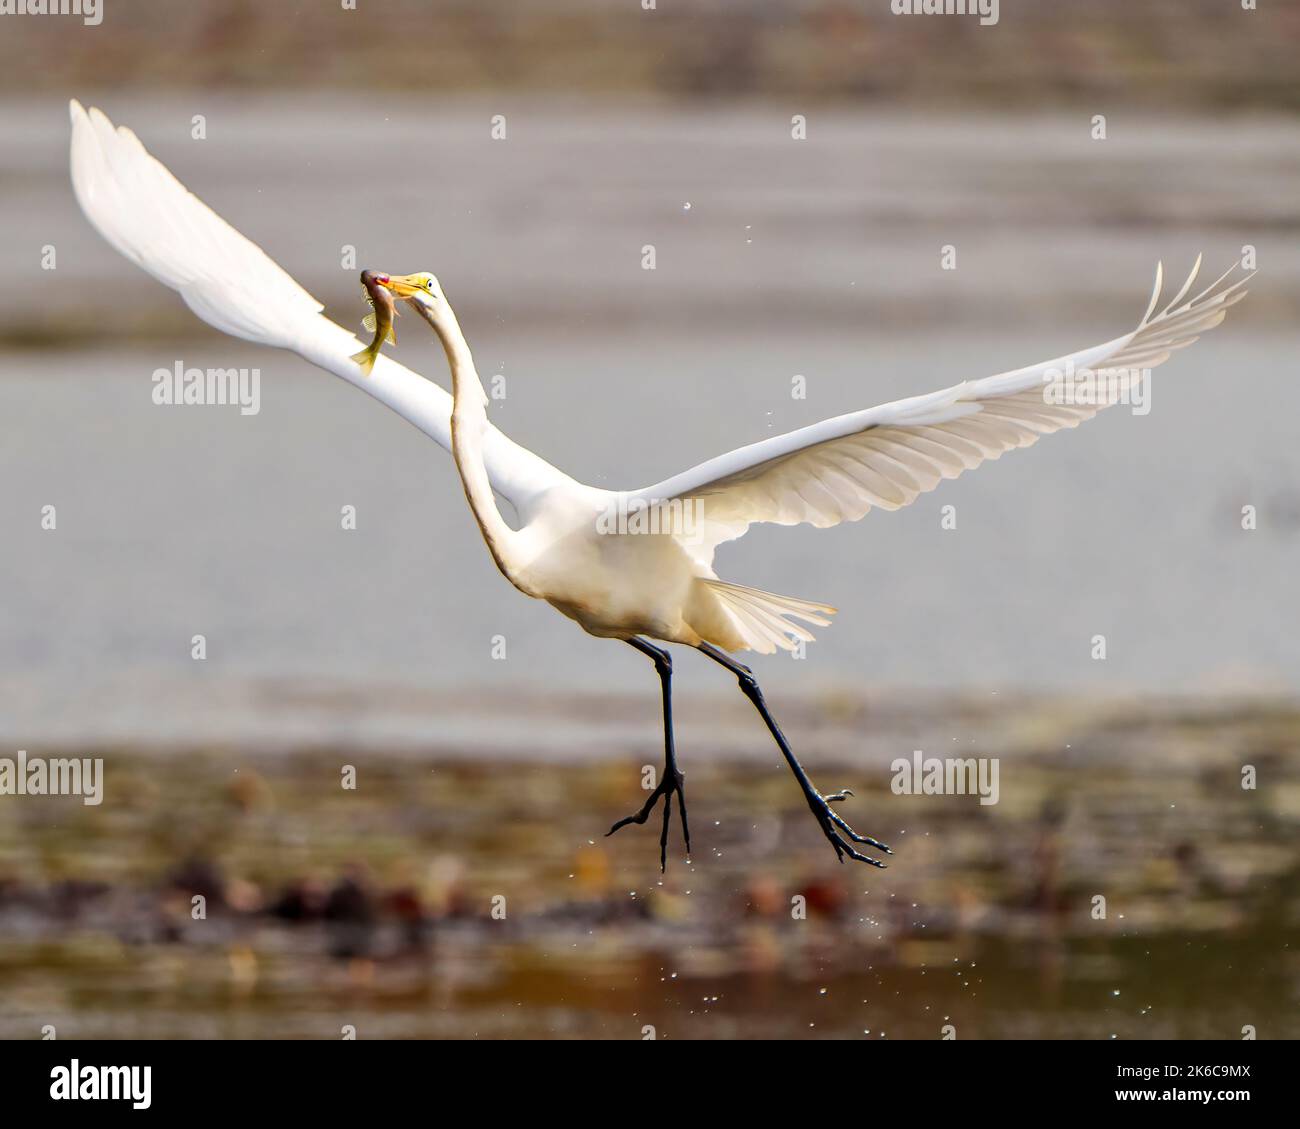 Great White Egret flying with a fish in its beak, displaying spread wings and beautiful white feather plumage in its environment and wetland habitat. Stock Photo